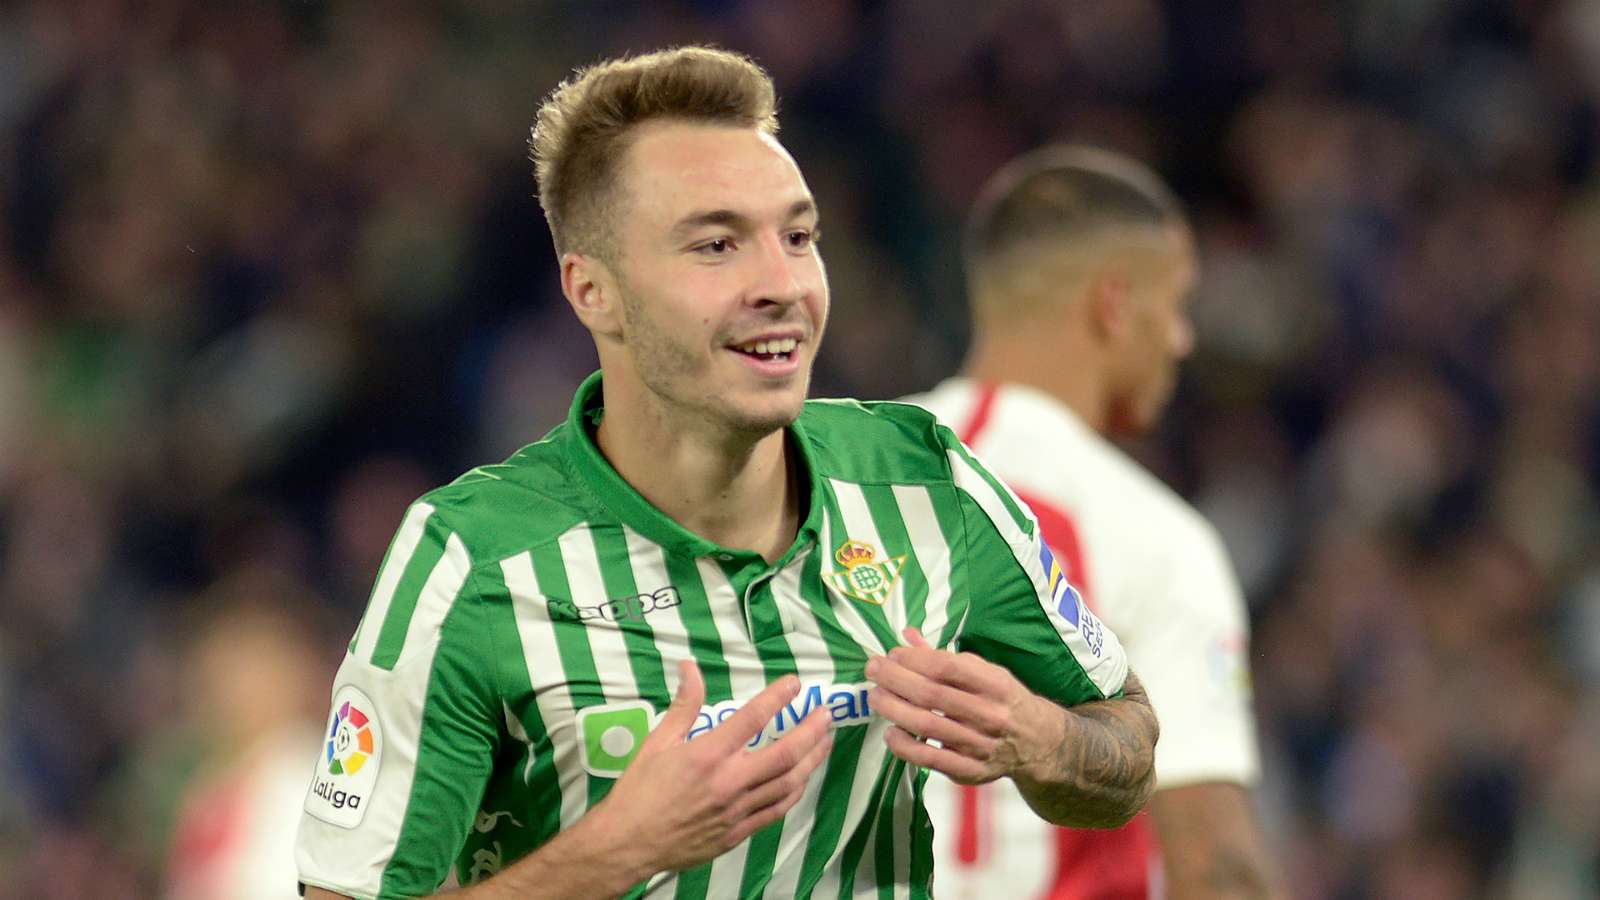 Barcelona have asked about Loren but he's not leaving, say Betis - Bóng Đá